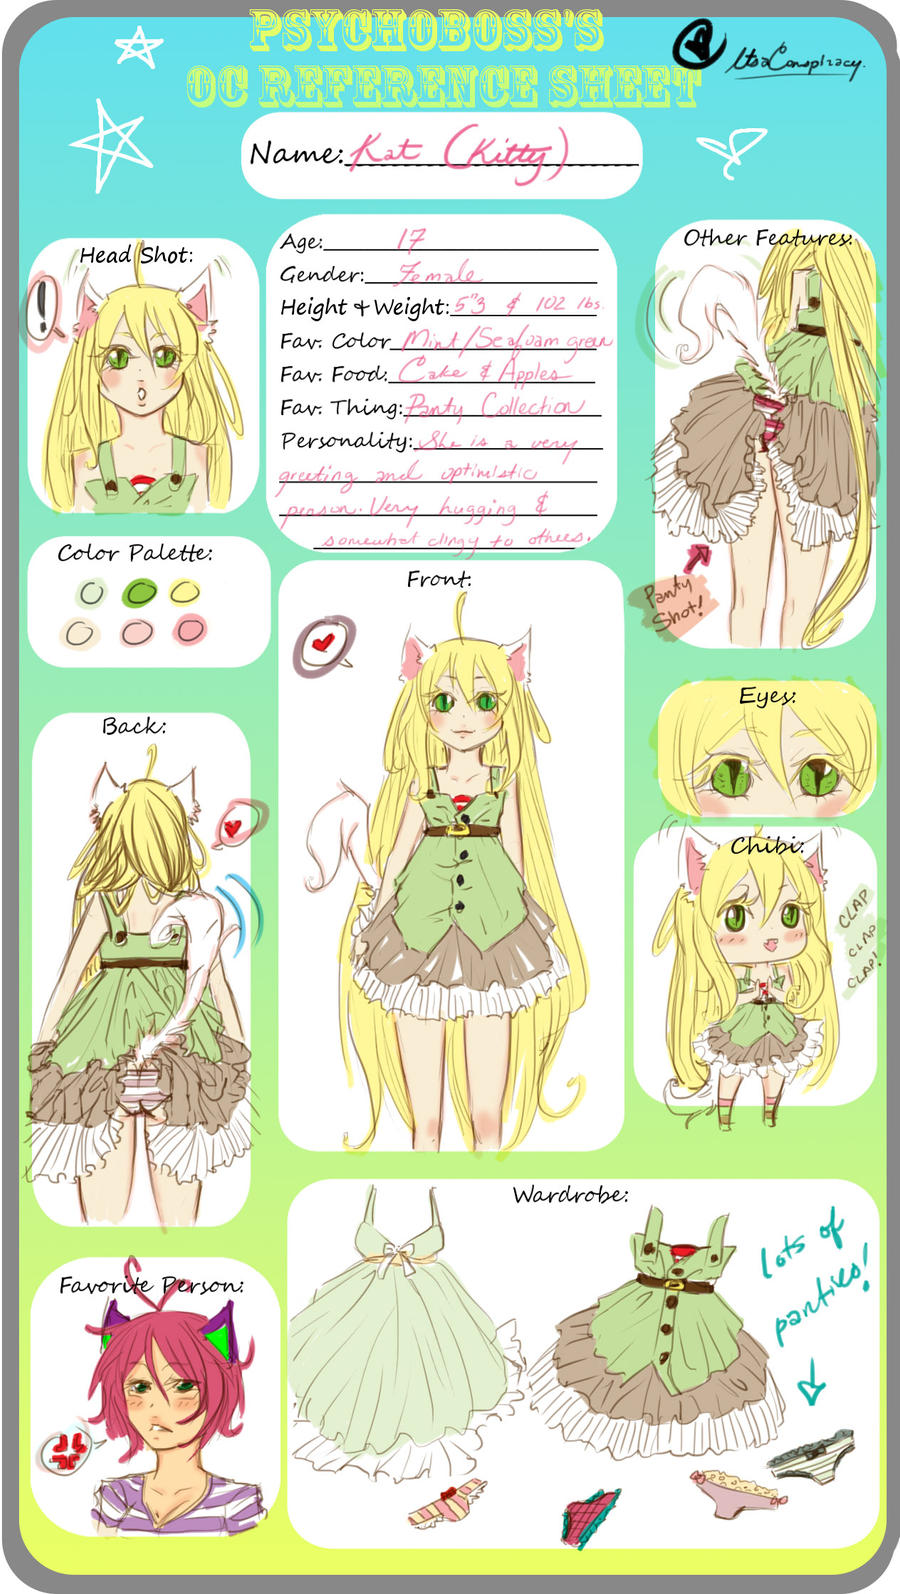 OC Reference Sheet: Kat by ConnieConnConn on DeviantArt